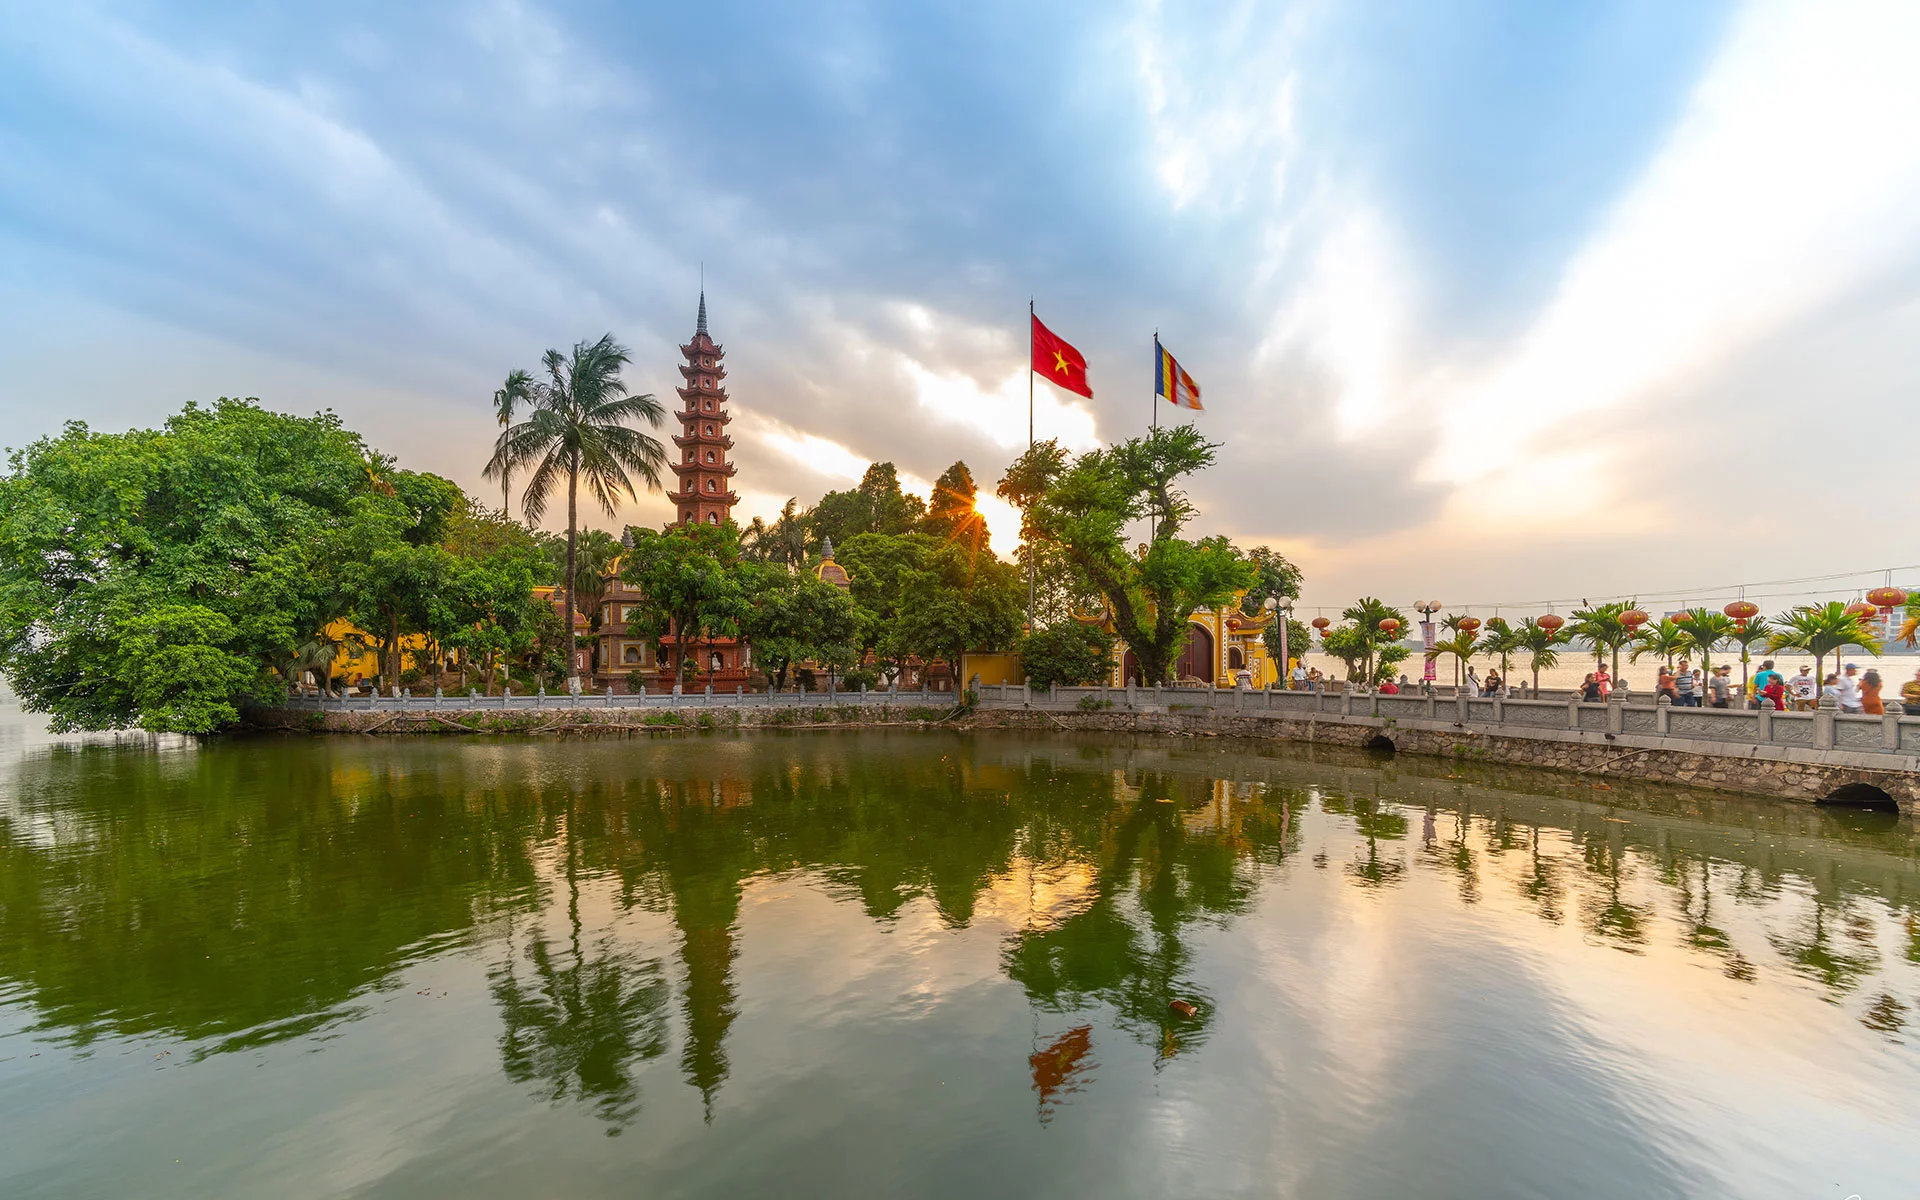 Tran Quoc Pagoda - one of key attractions in Hanoi